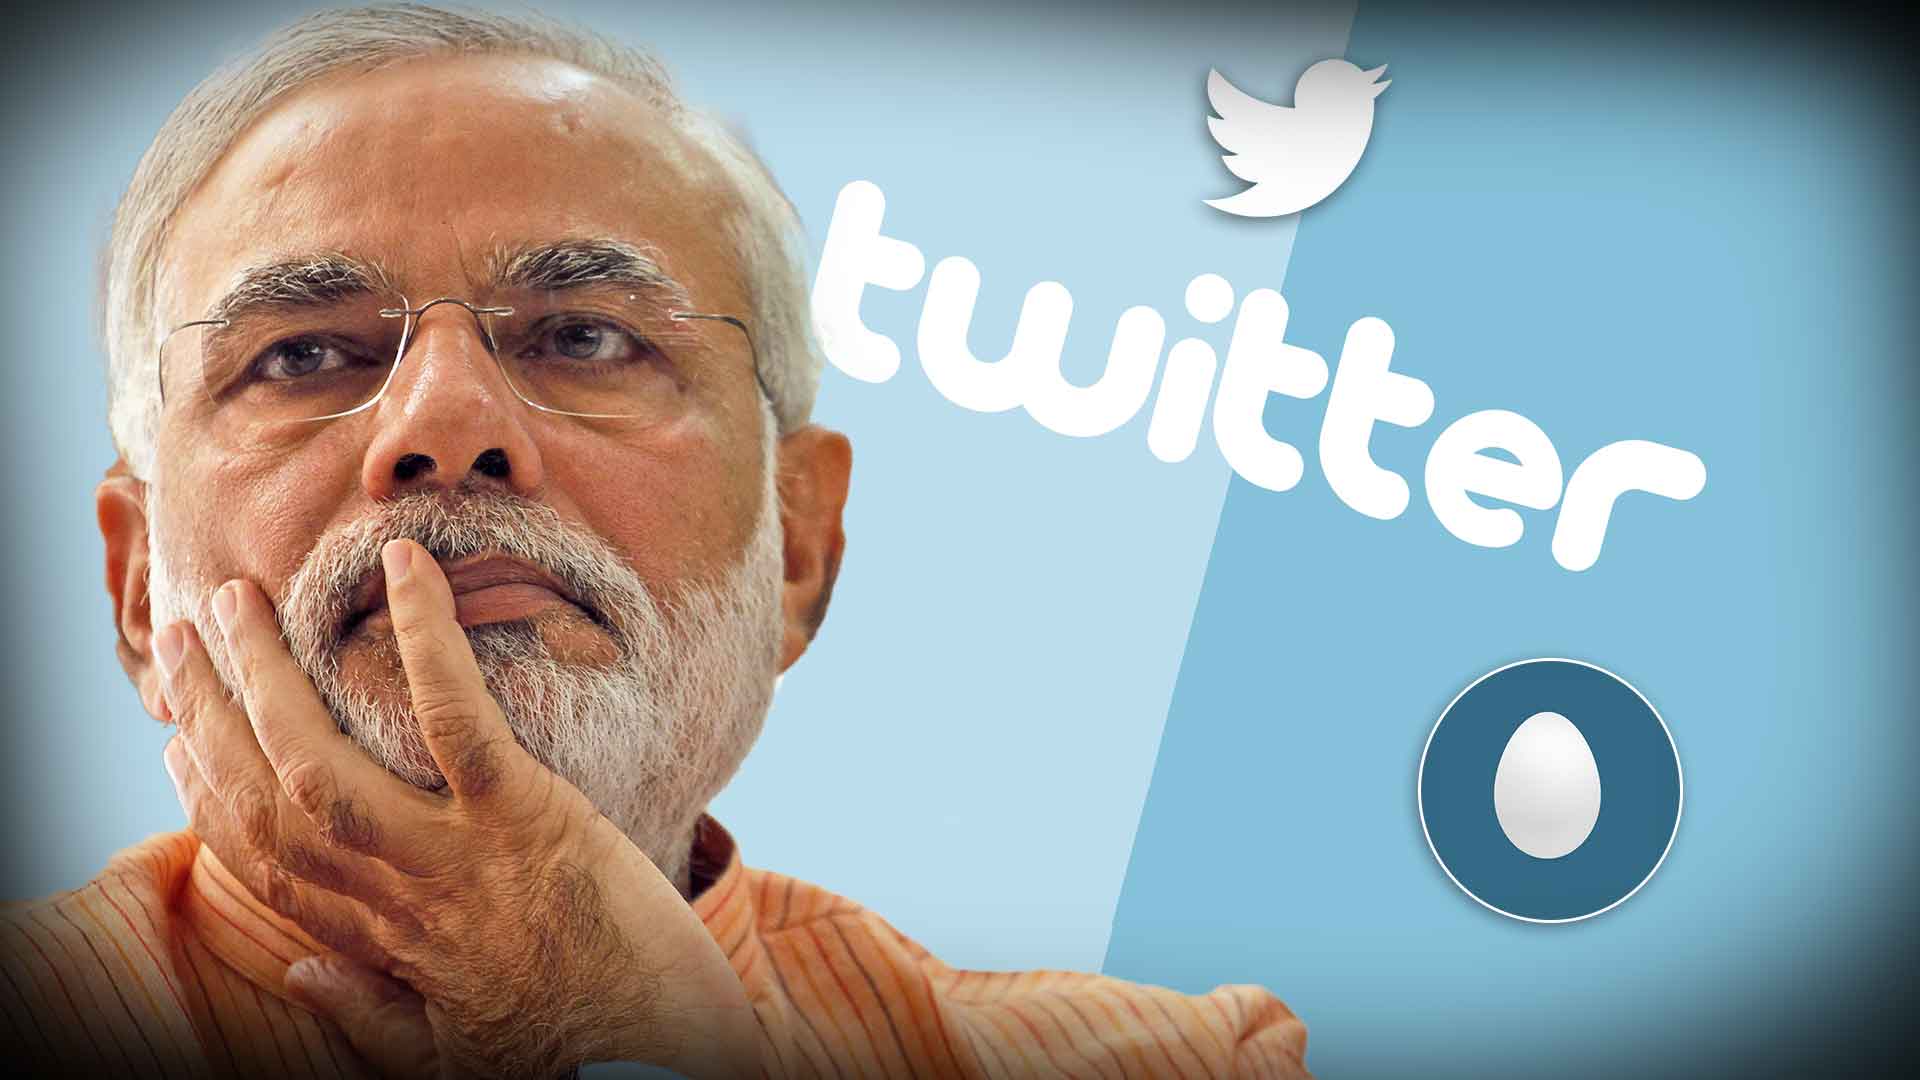 pm twitter hacked